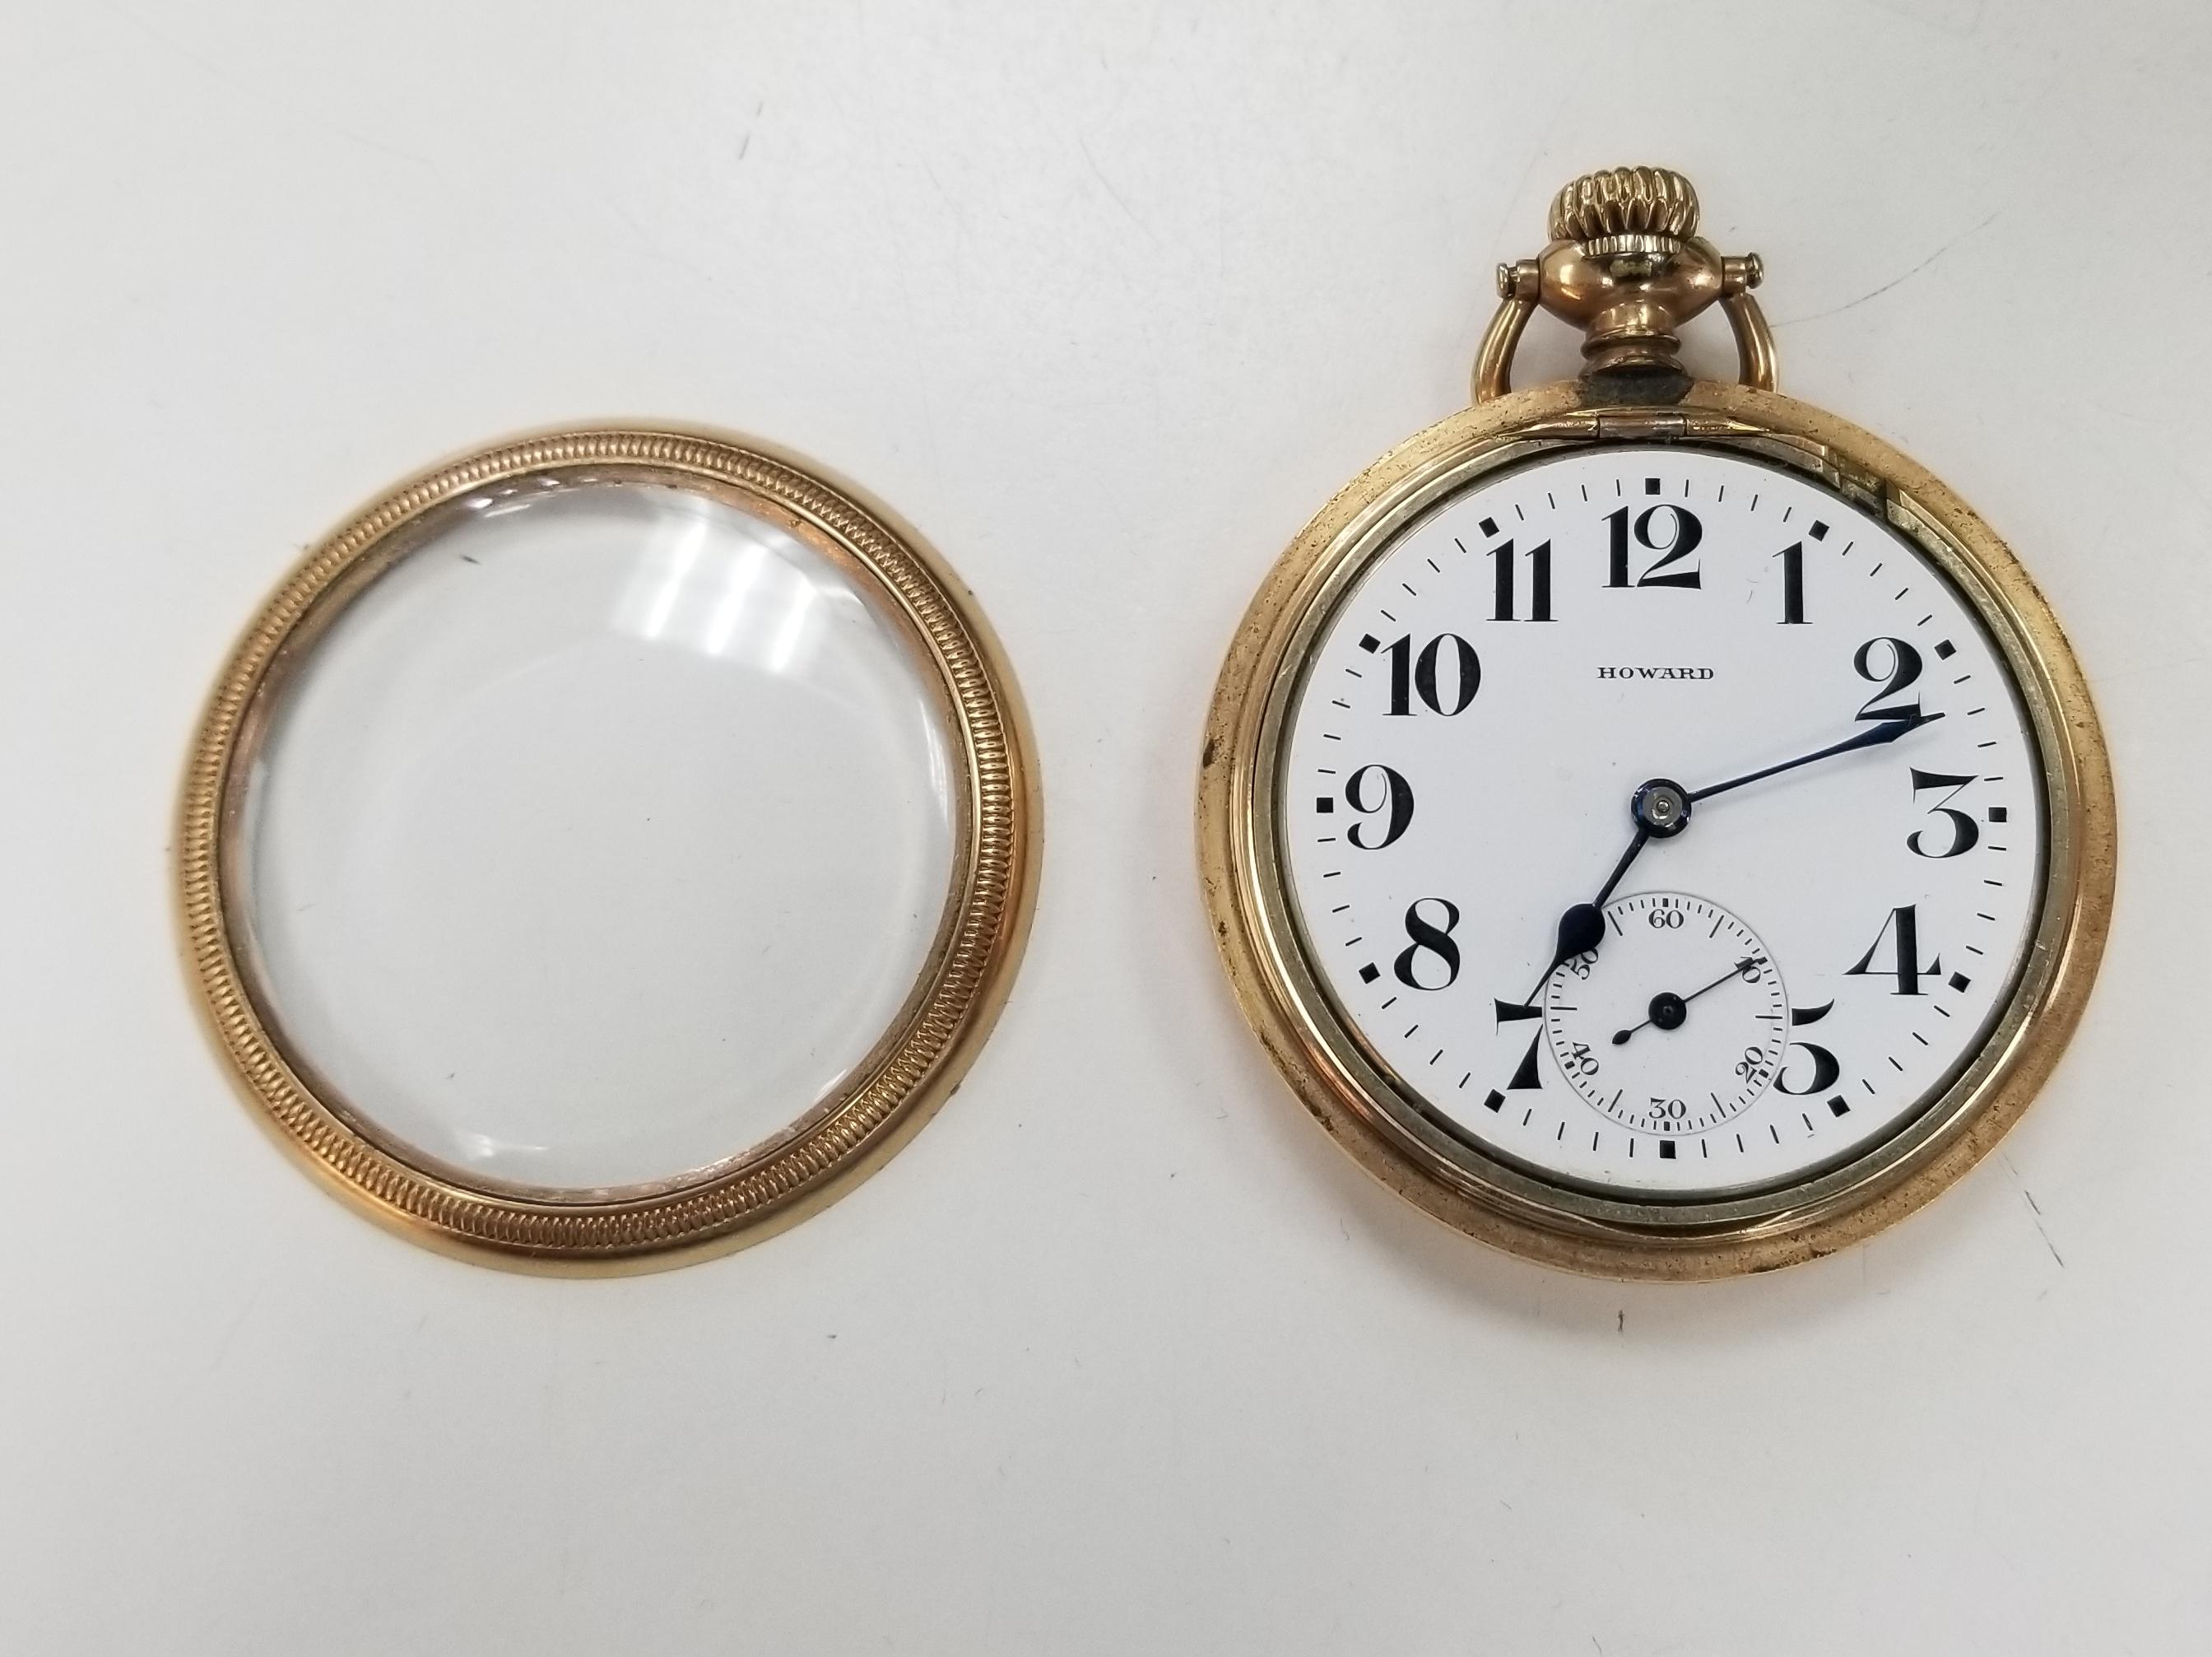 For sale is an antique E. Howard Series 11 Rail Road Chronometer Gold Filled pocket watch. It is all original, 16 size and was made around 1914. It has a beautiful Series 11 Rail Road grade 21 jewel movement, 53mm  and is housed in it's original